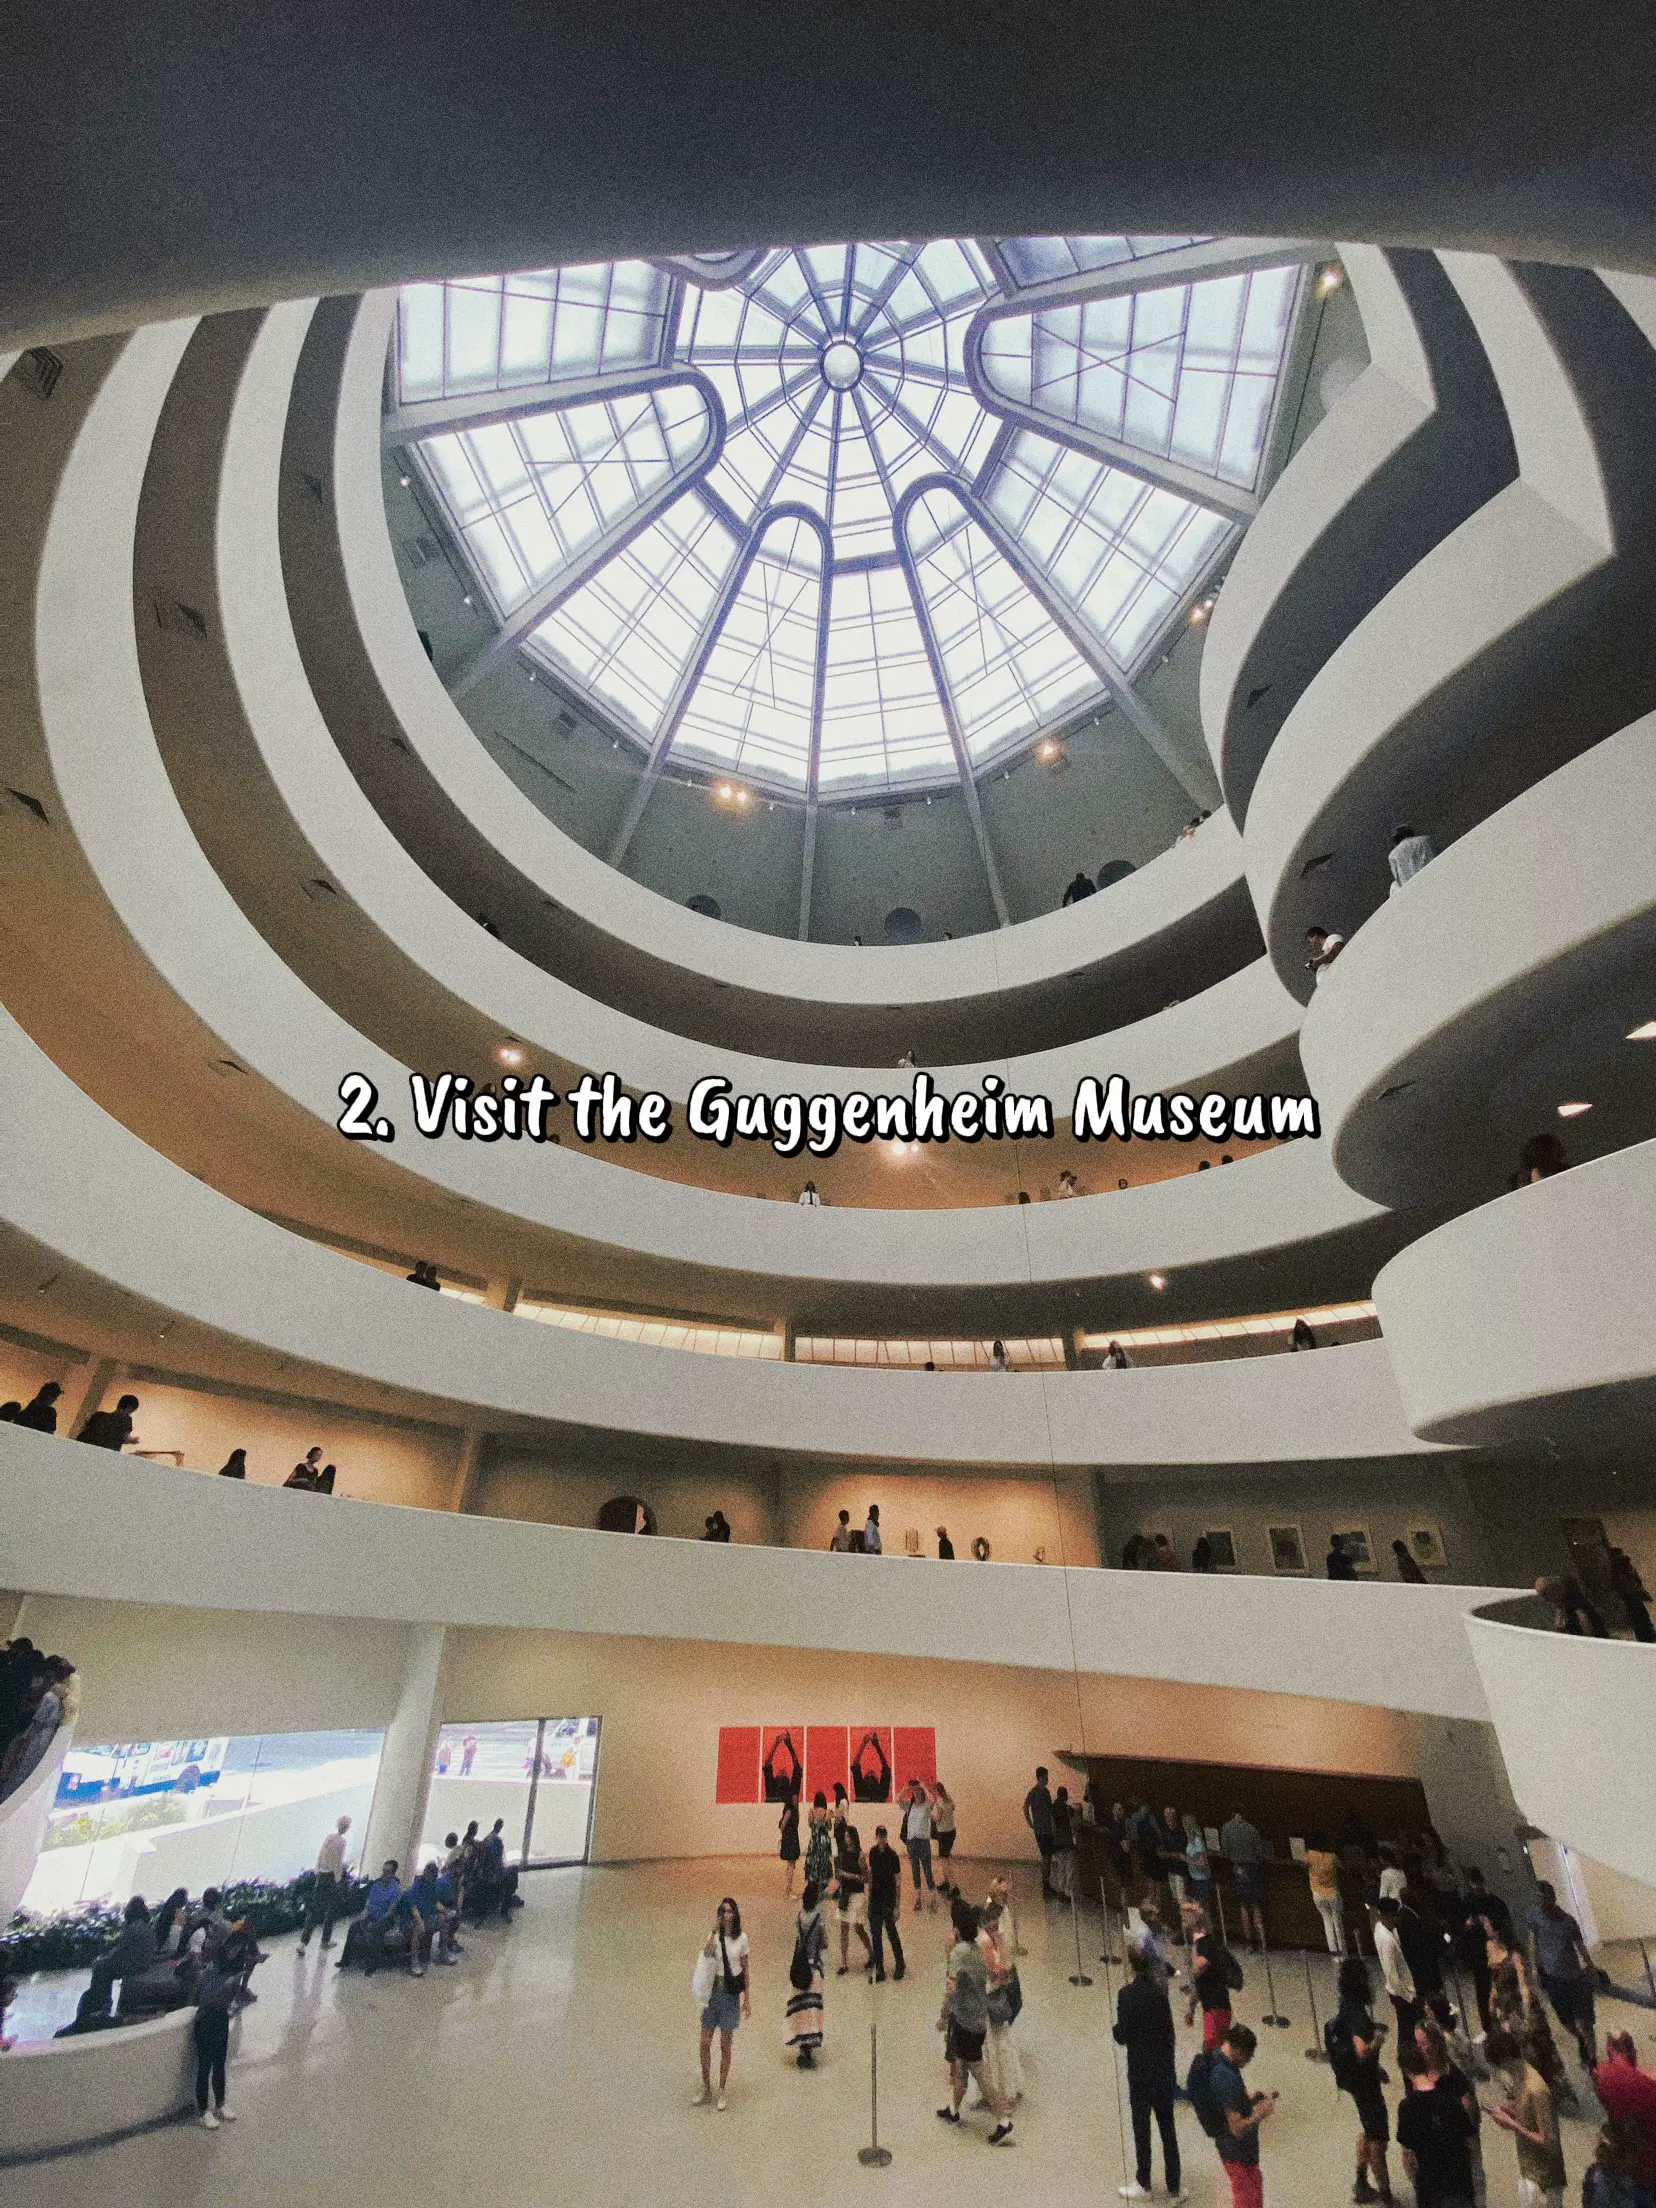  A large group of people are gathered in a building with a dome. The building has a sign that says "Visit the Guggenheim Museum".